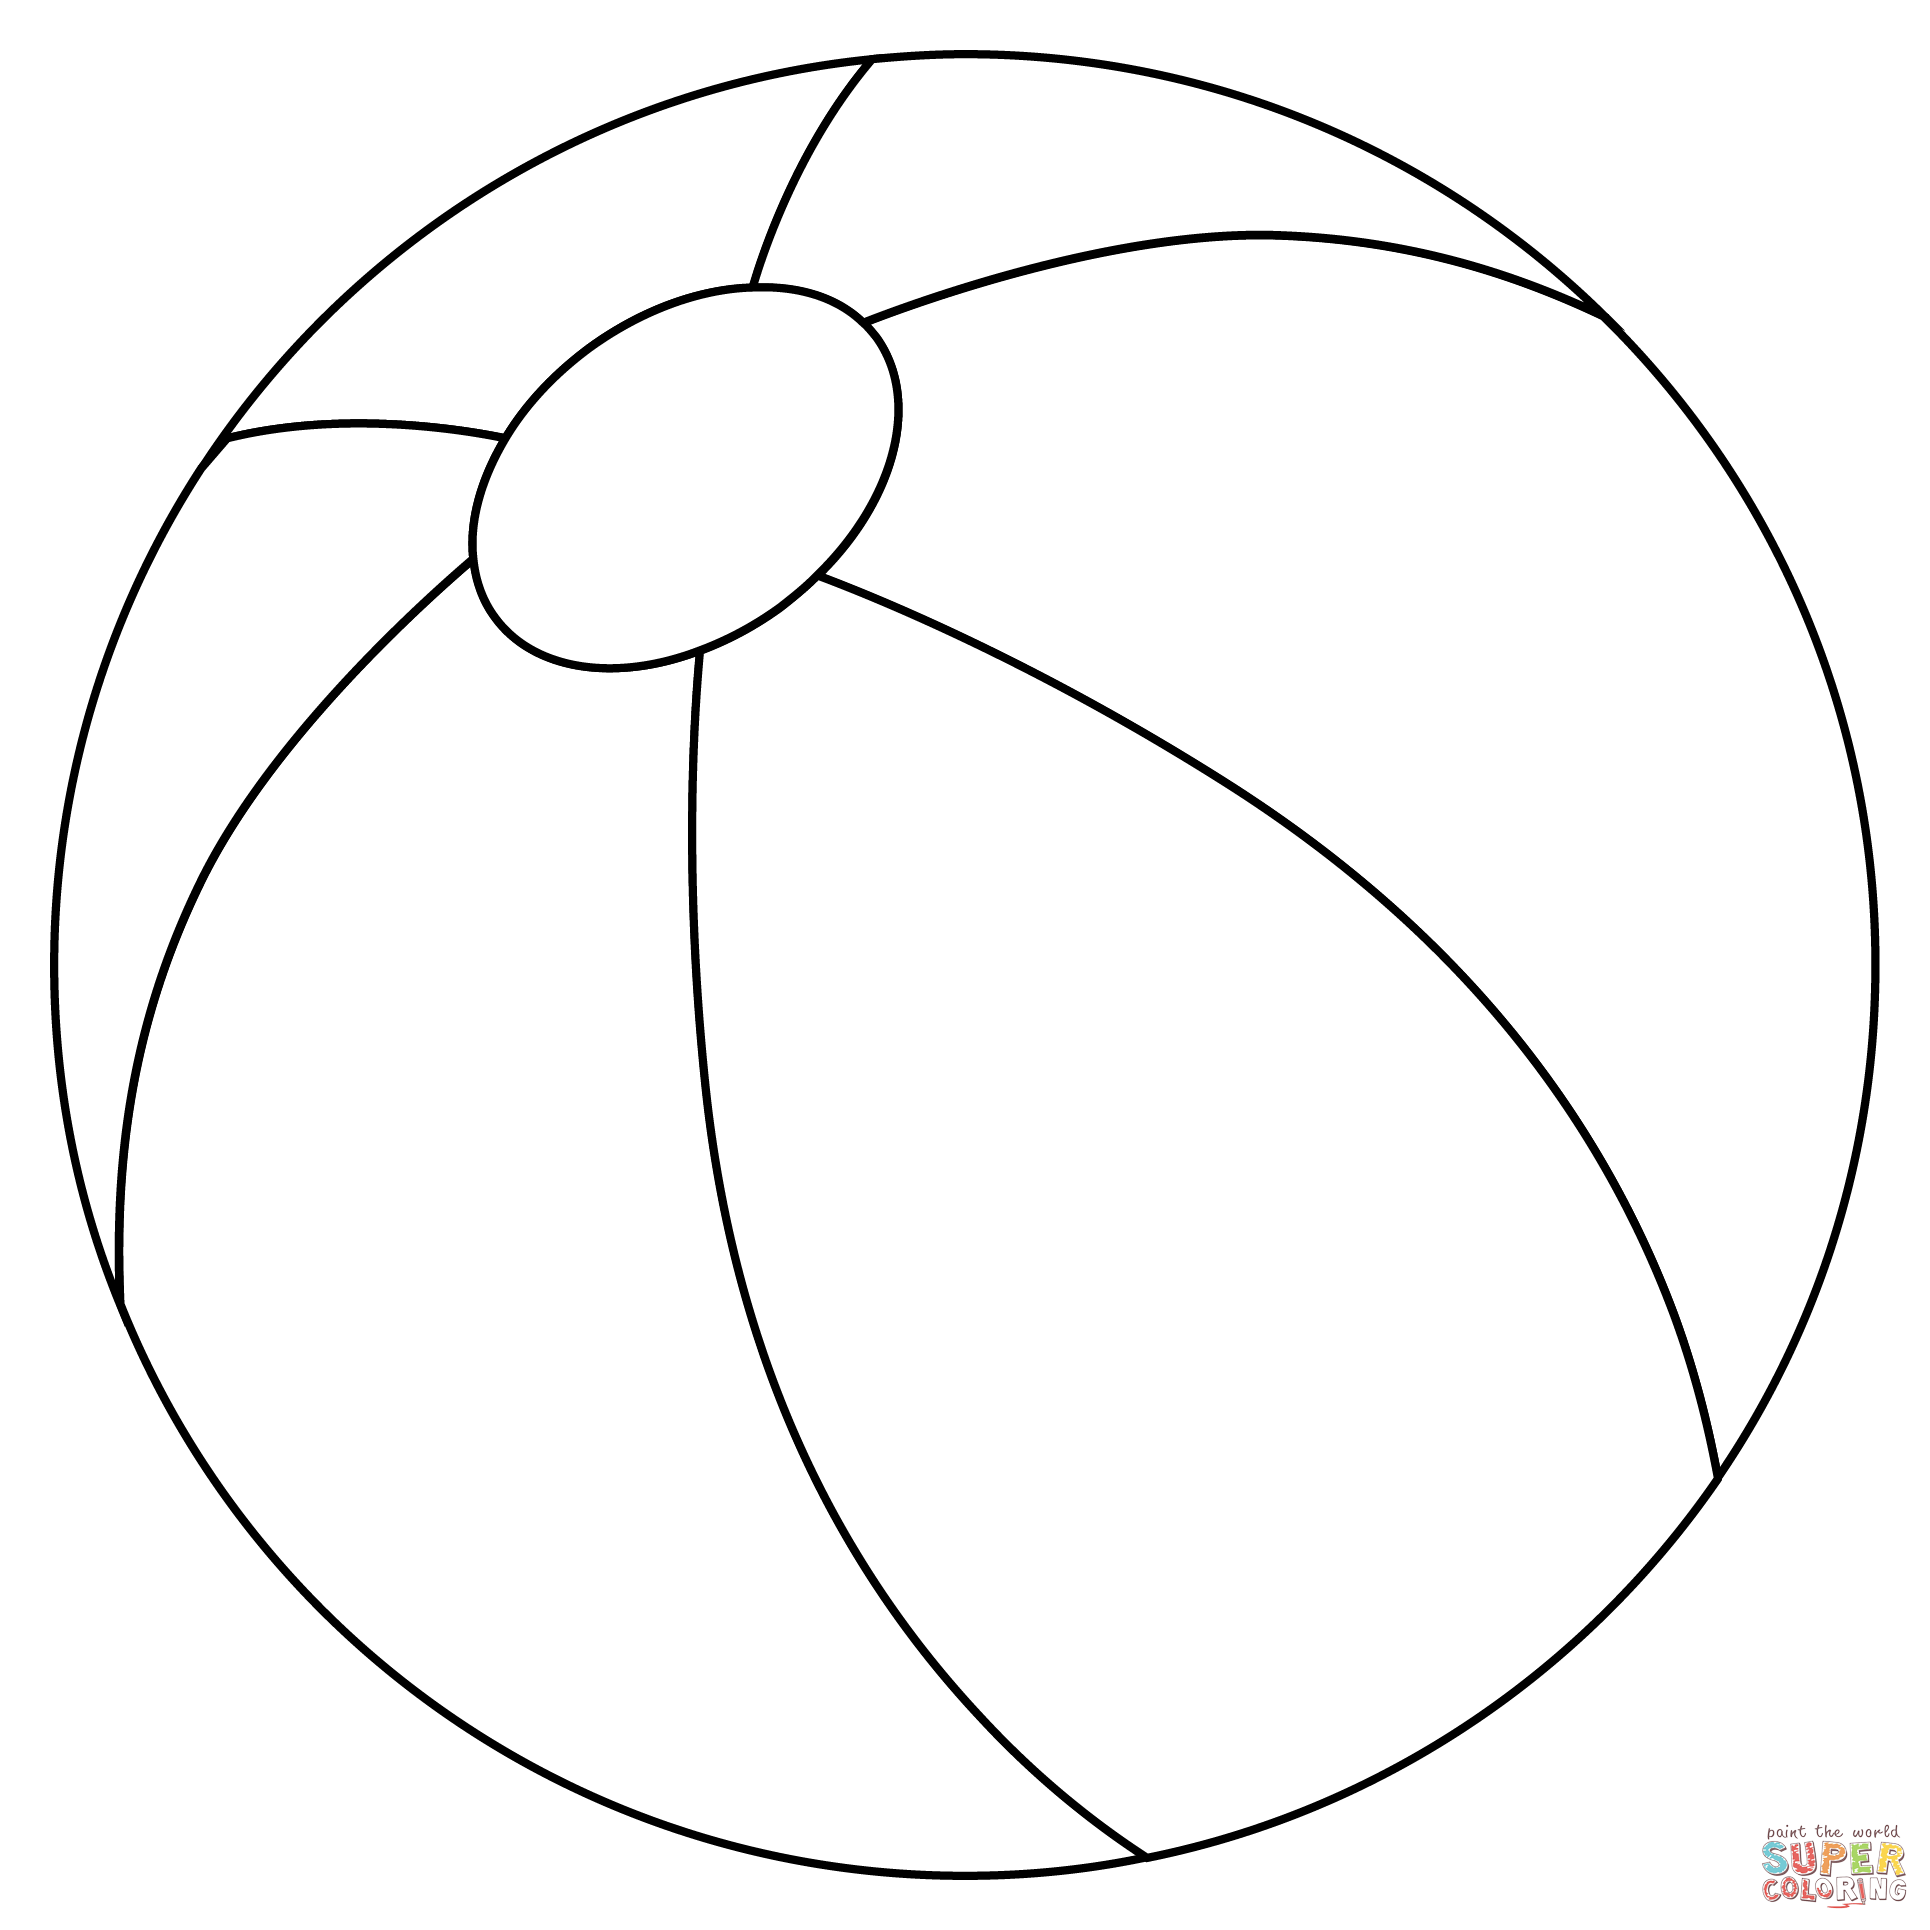 Beach ball coloring page free printable coloring pages